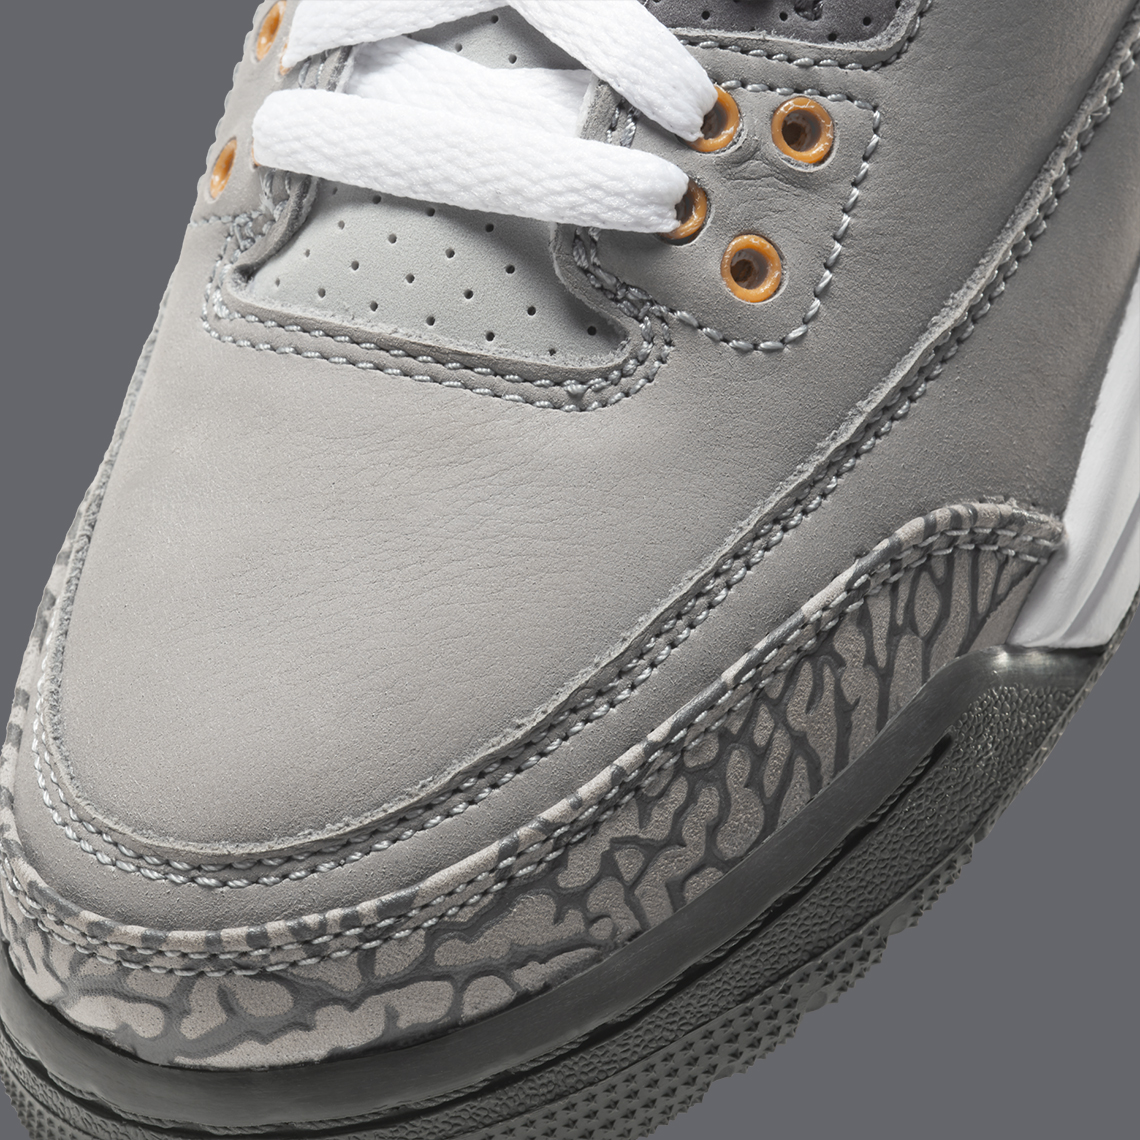 Releasing at jordan xxxiv doors is the Retro Gs Cool Grey 398614 012 Official Images 8